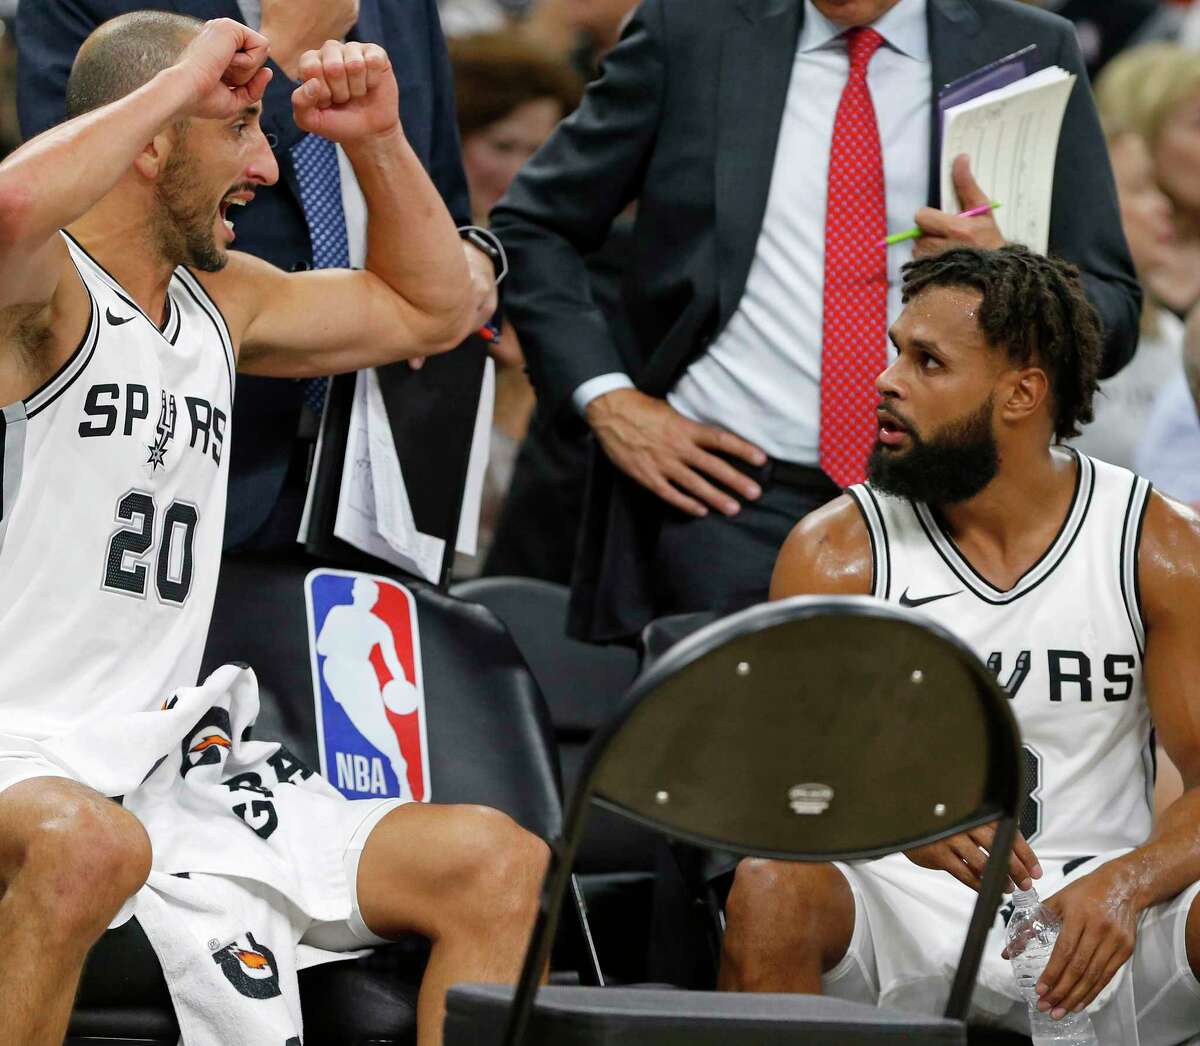 San Antonio Spurs?• Manu Ginobili talks with Patty Mills on the bench during a second half timeout against the Toronto Raptors Monday Oct. 23, 2017 at the AT&T Center. The Spurs won 101-97.